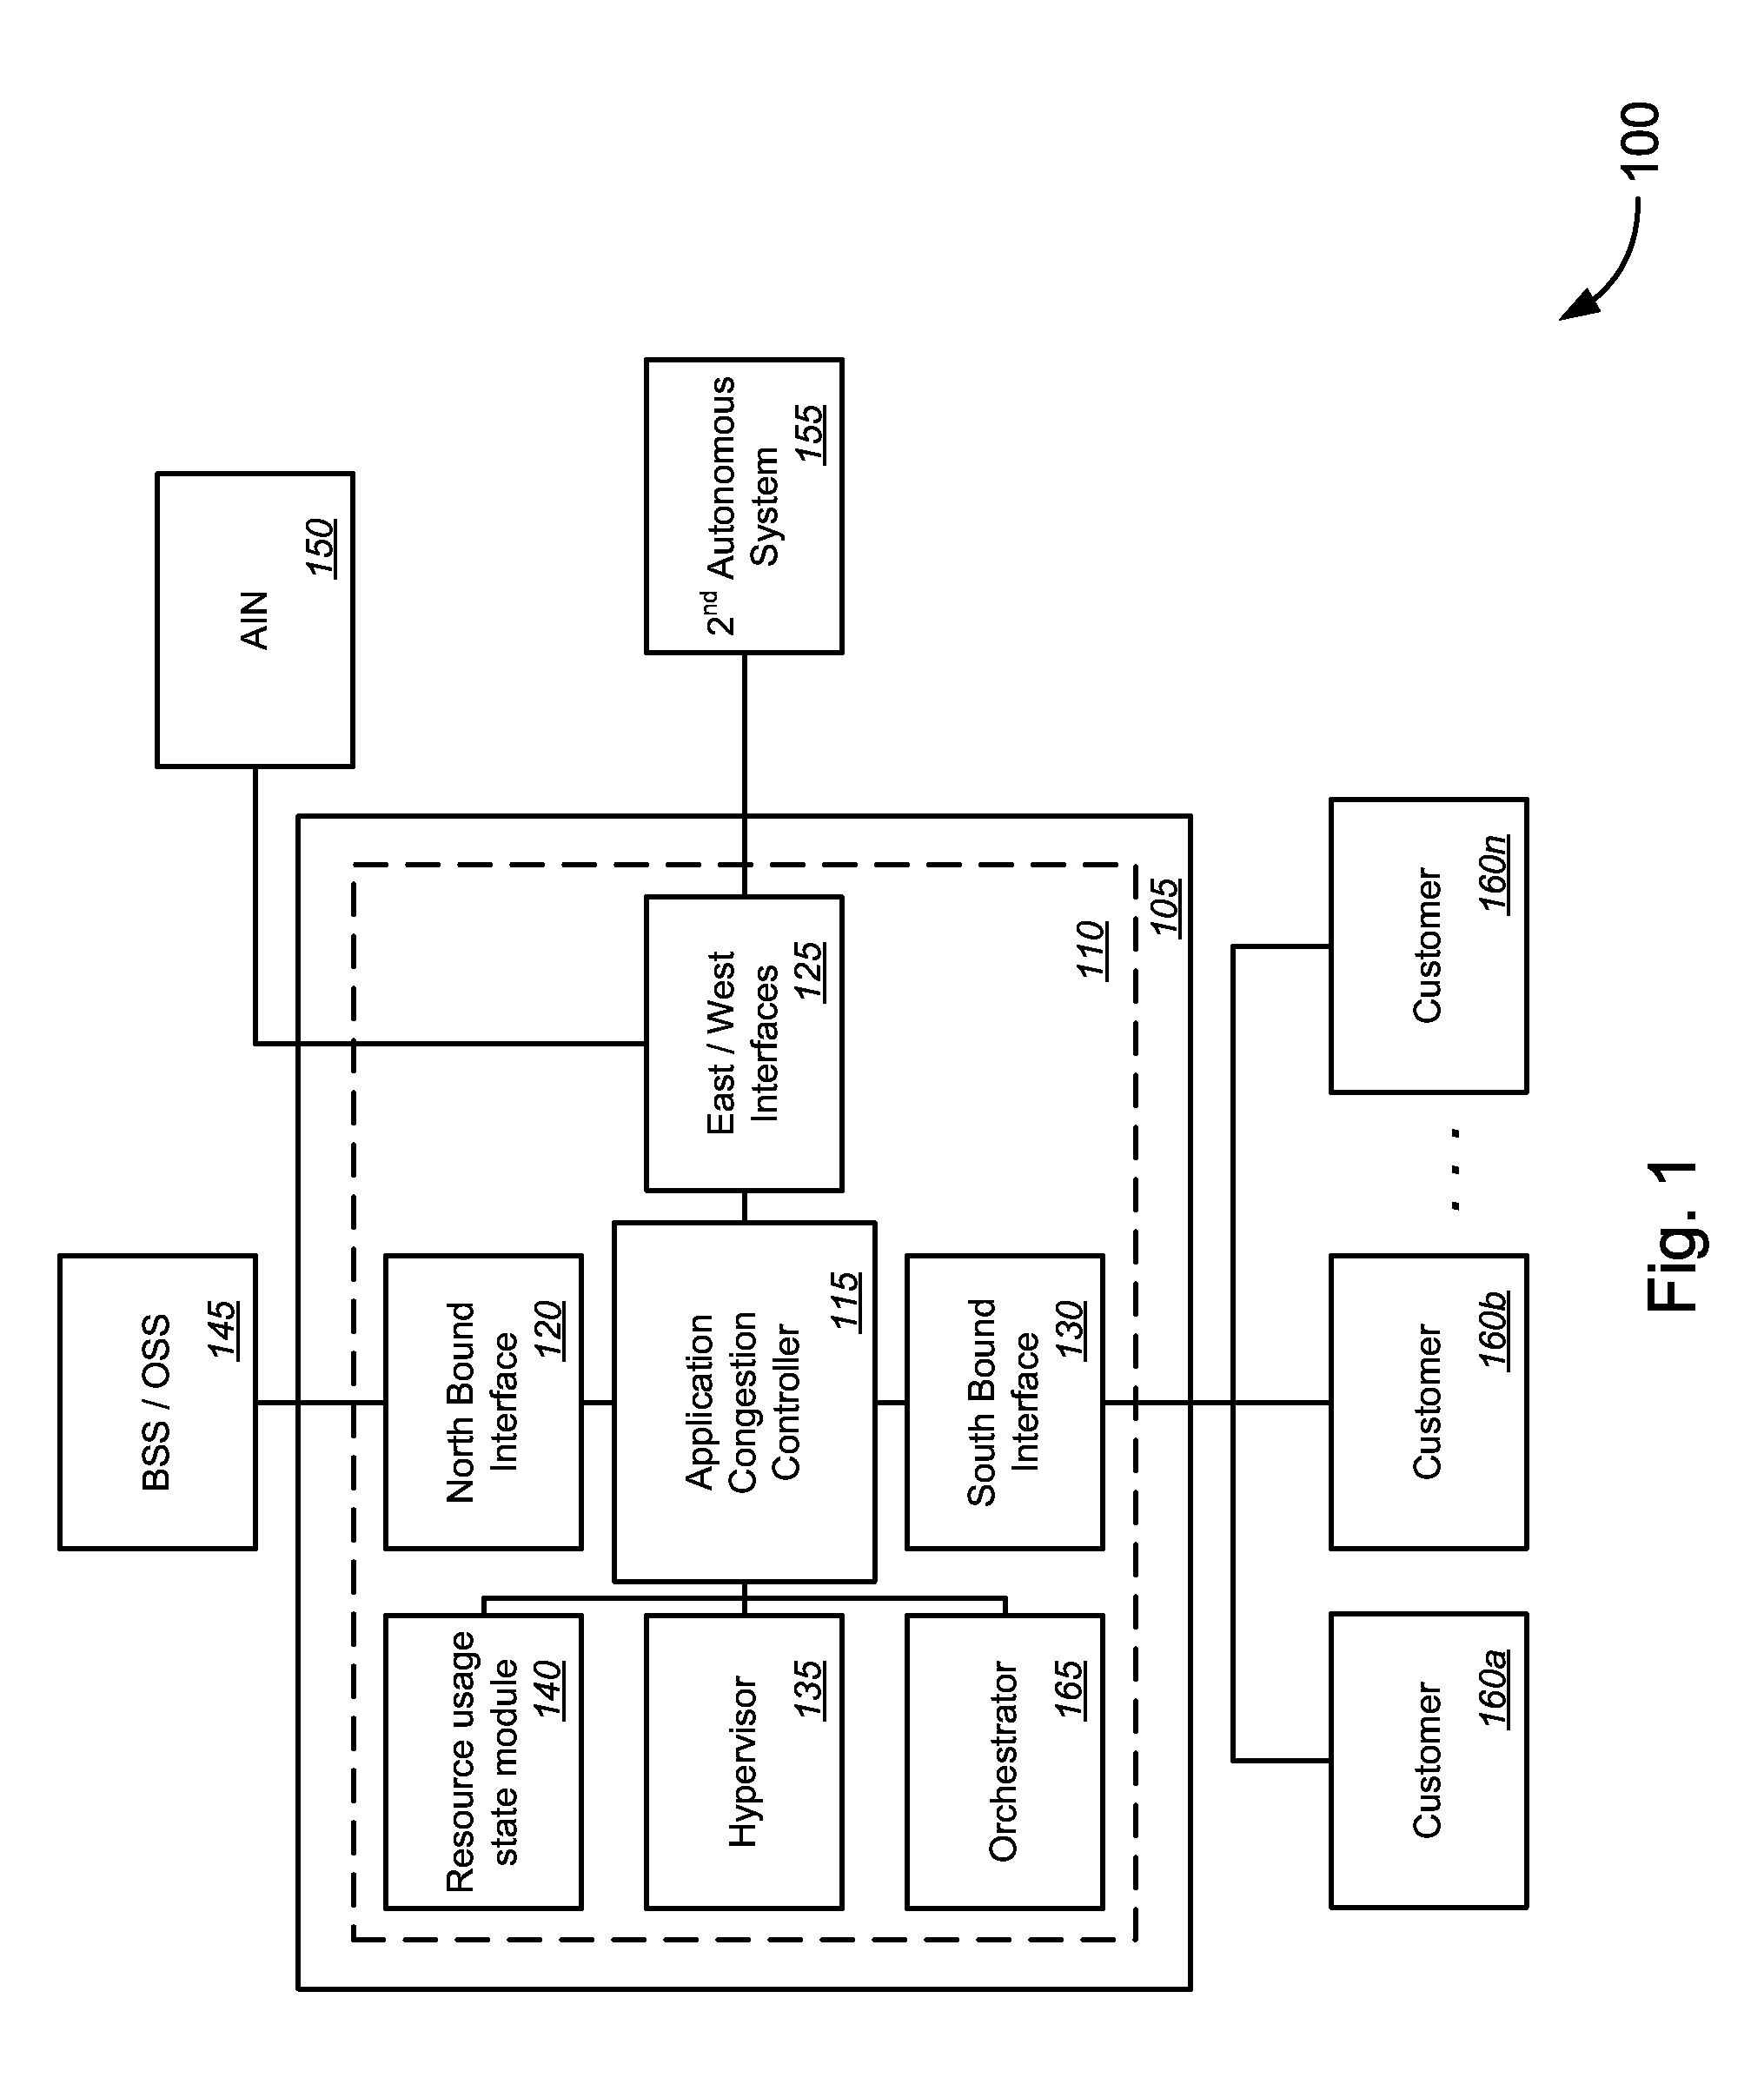 Virtualization congestion control framework for modifying execution of applications on virtual machine based on mass congestion indicator in host computing system